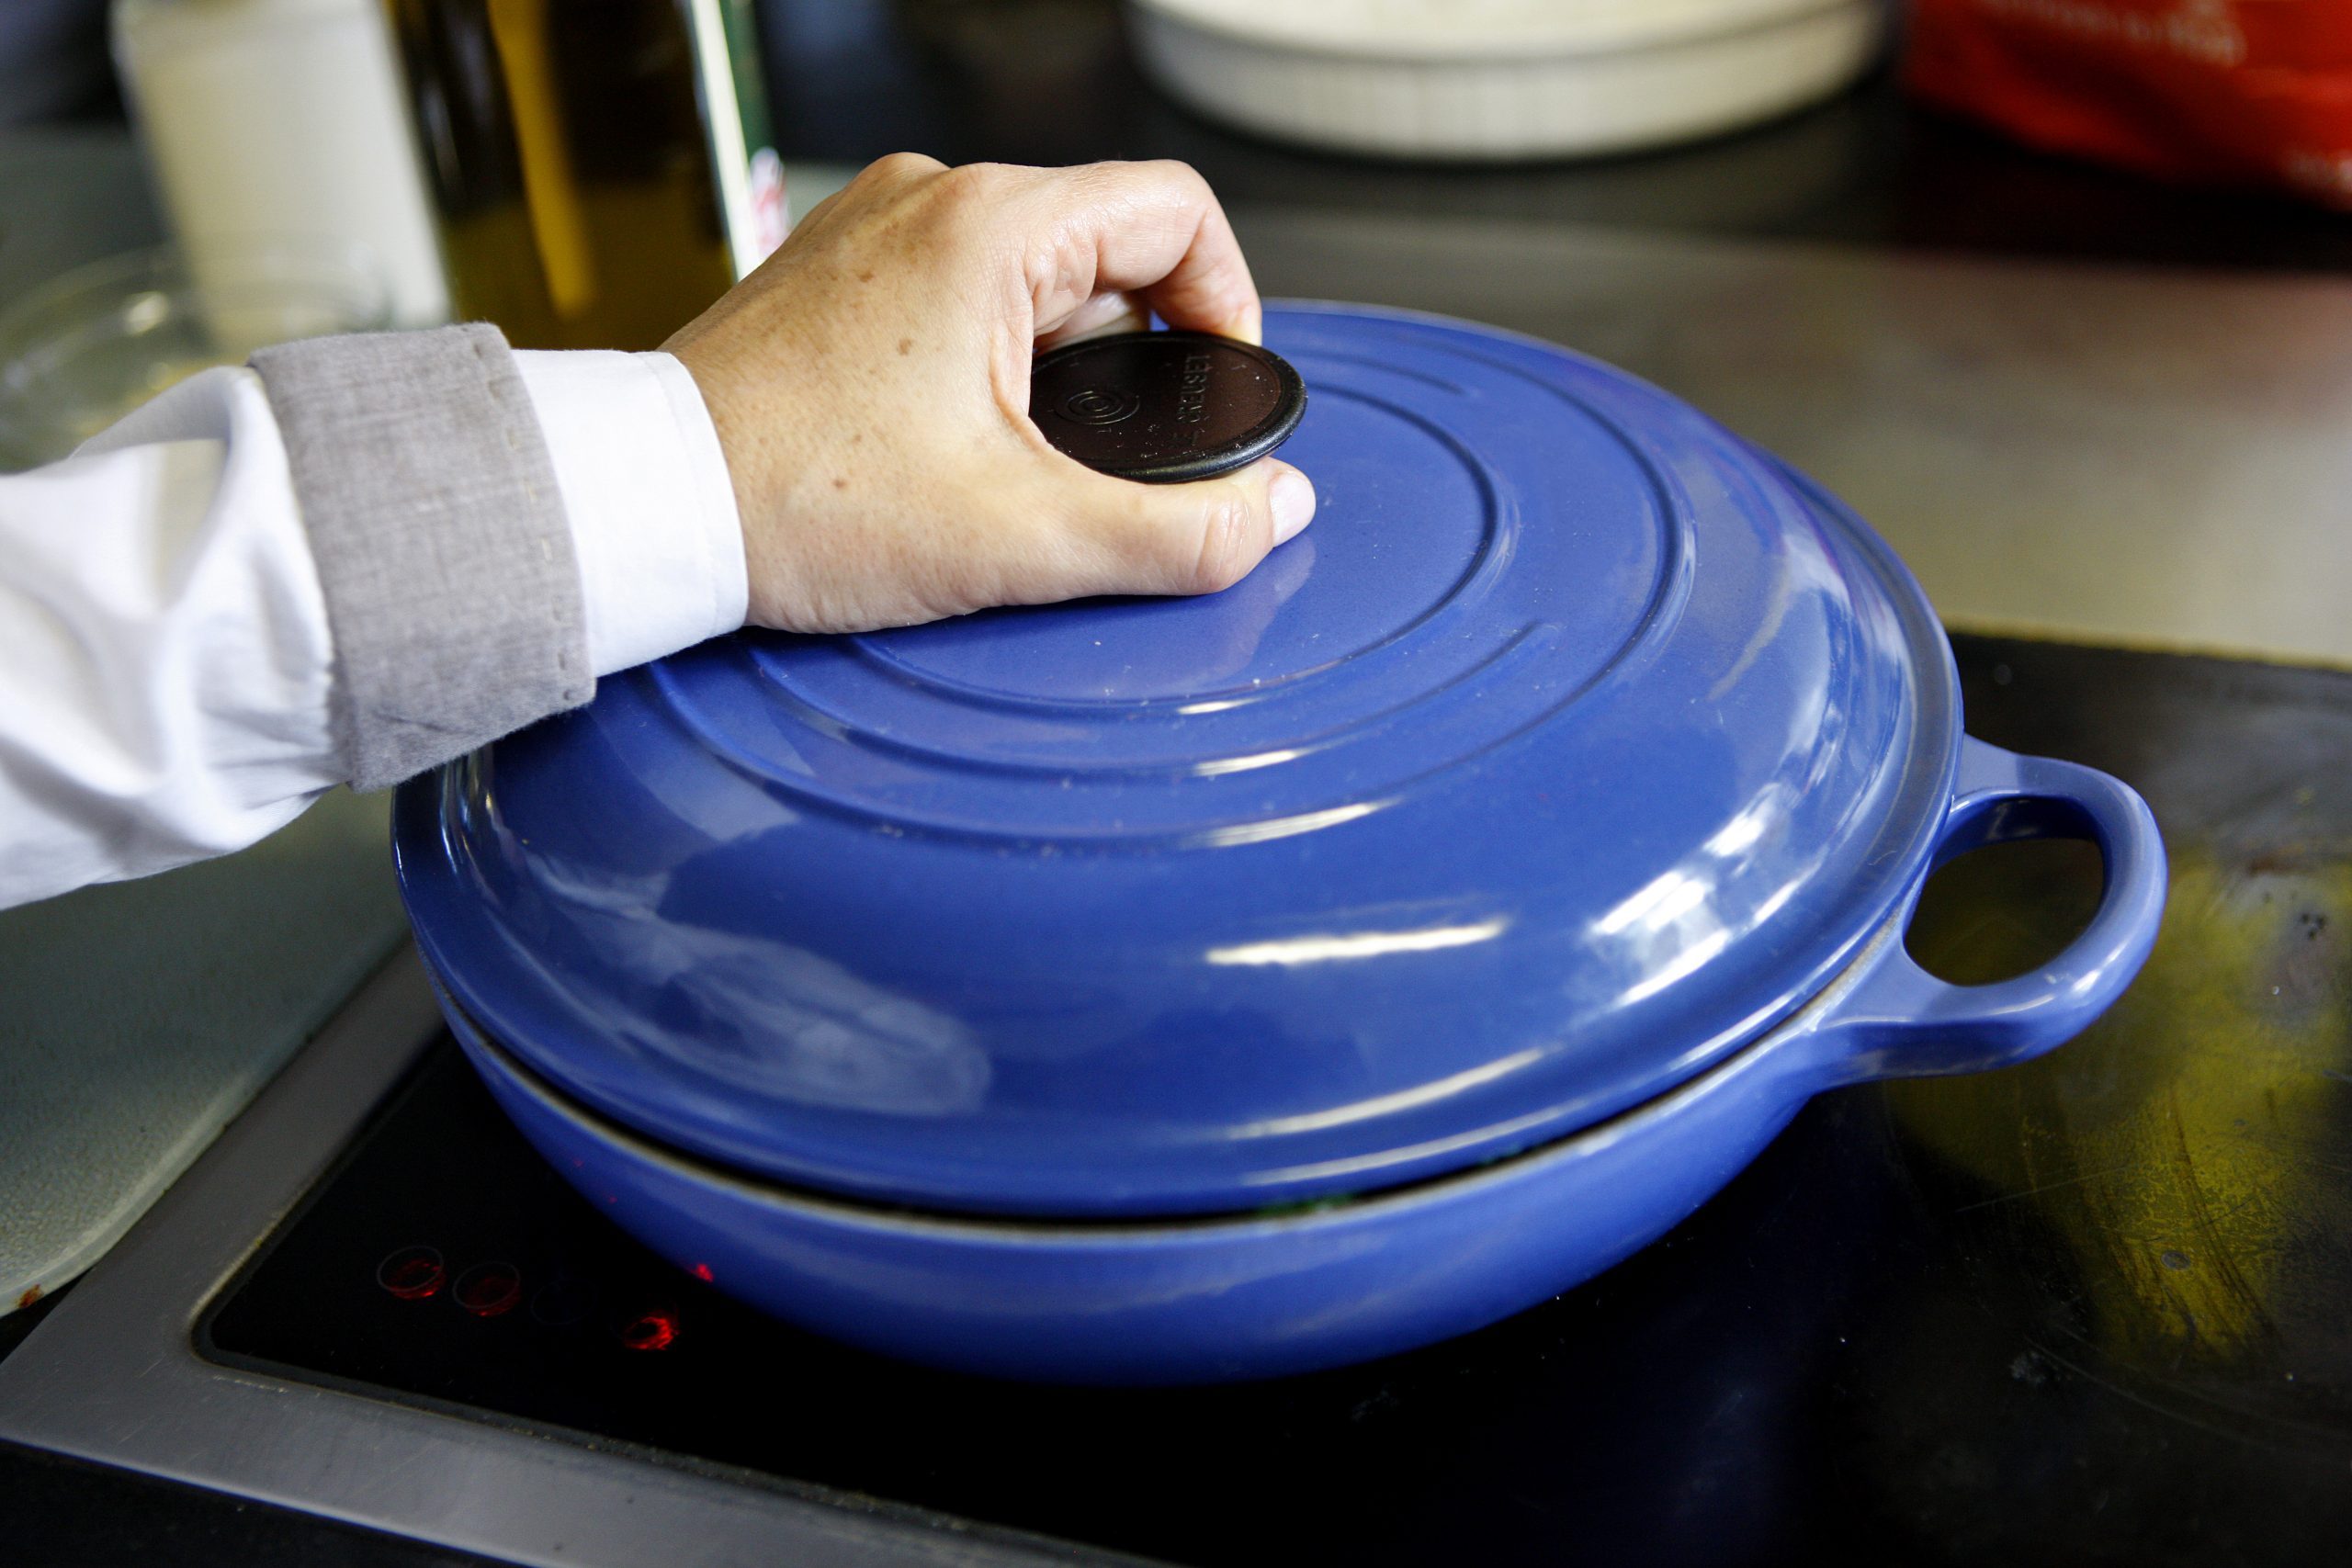 Le Creuset Says Olive Oil Can Damage Your Expensive Pans—Here's What You Need to Know